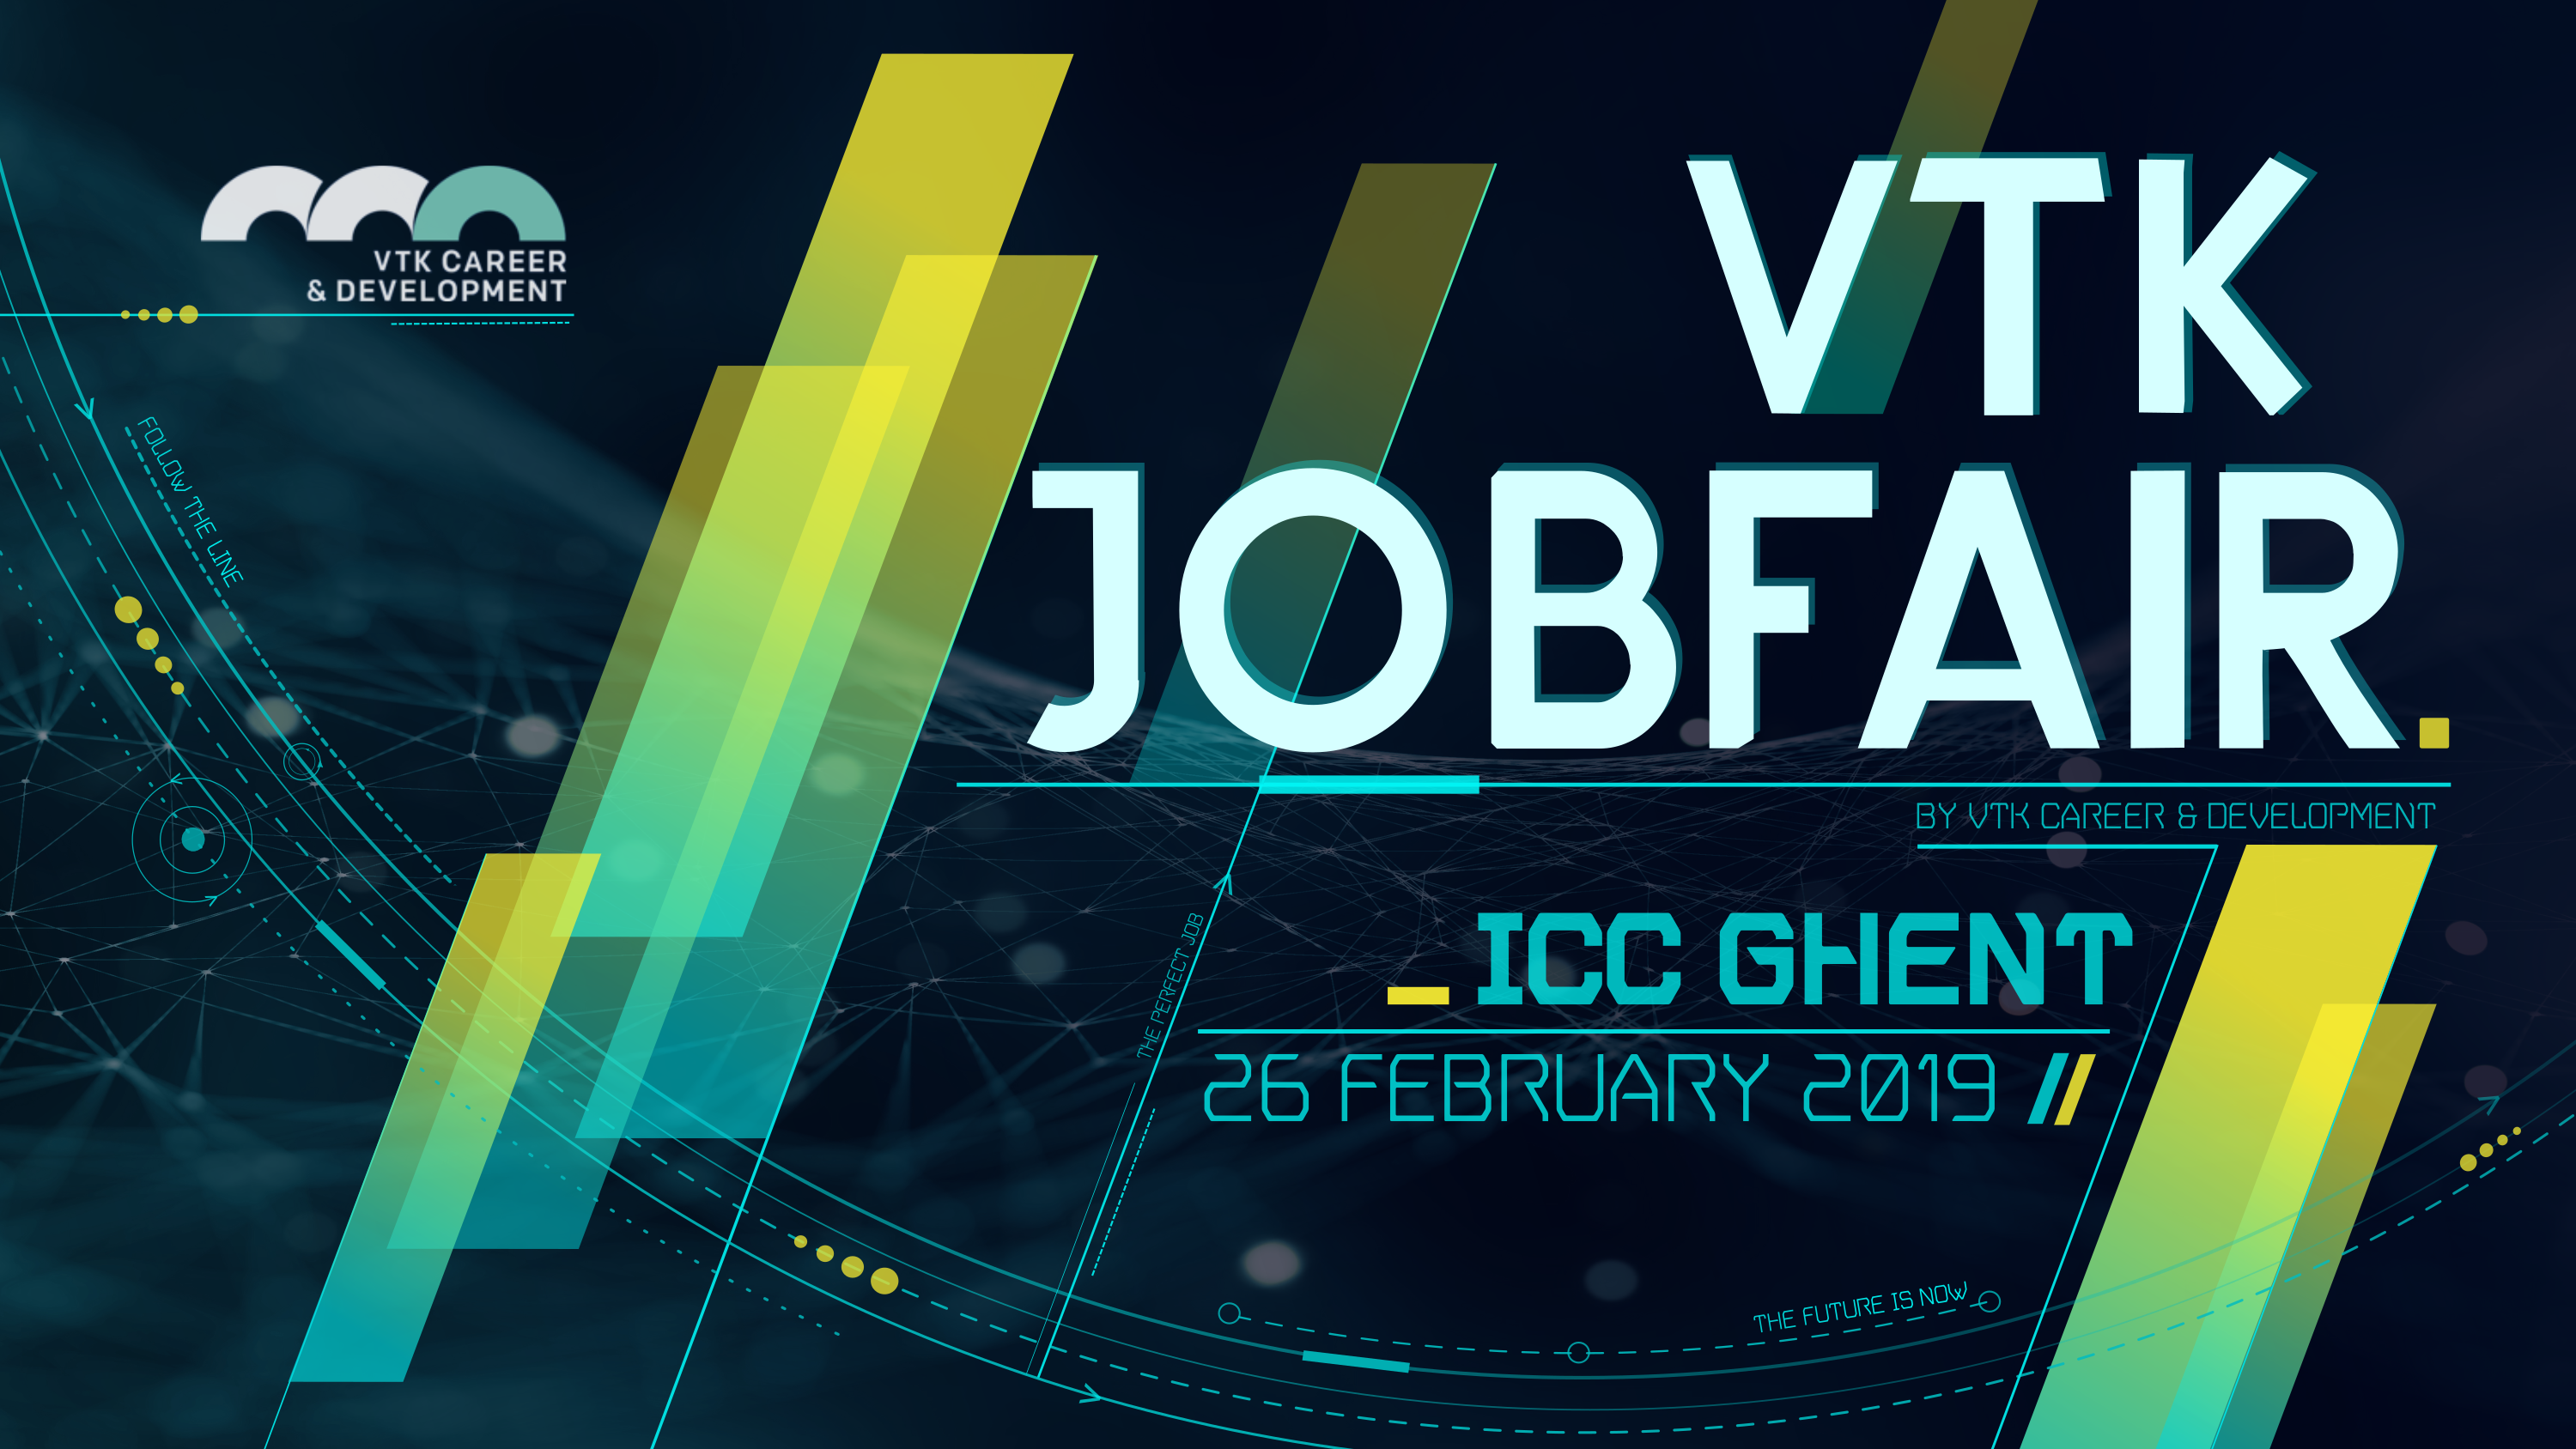 Subscribe for the VTK Jobfair